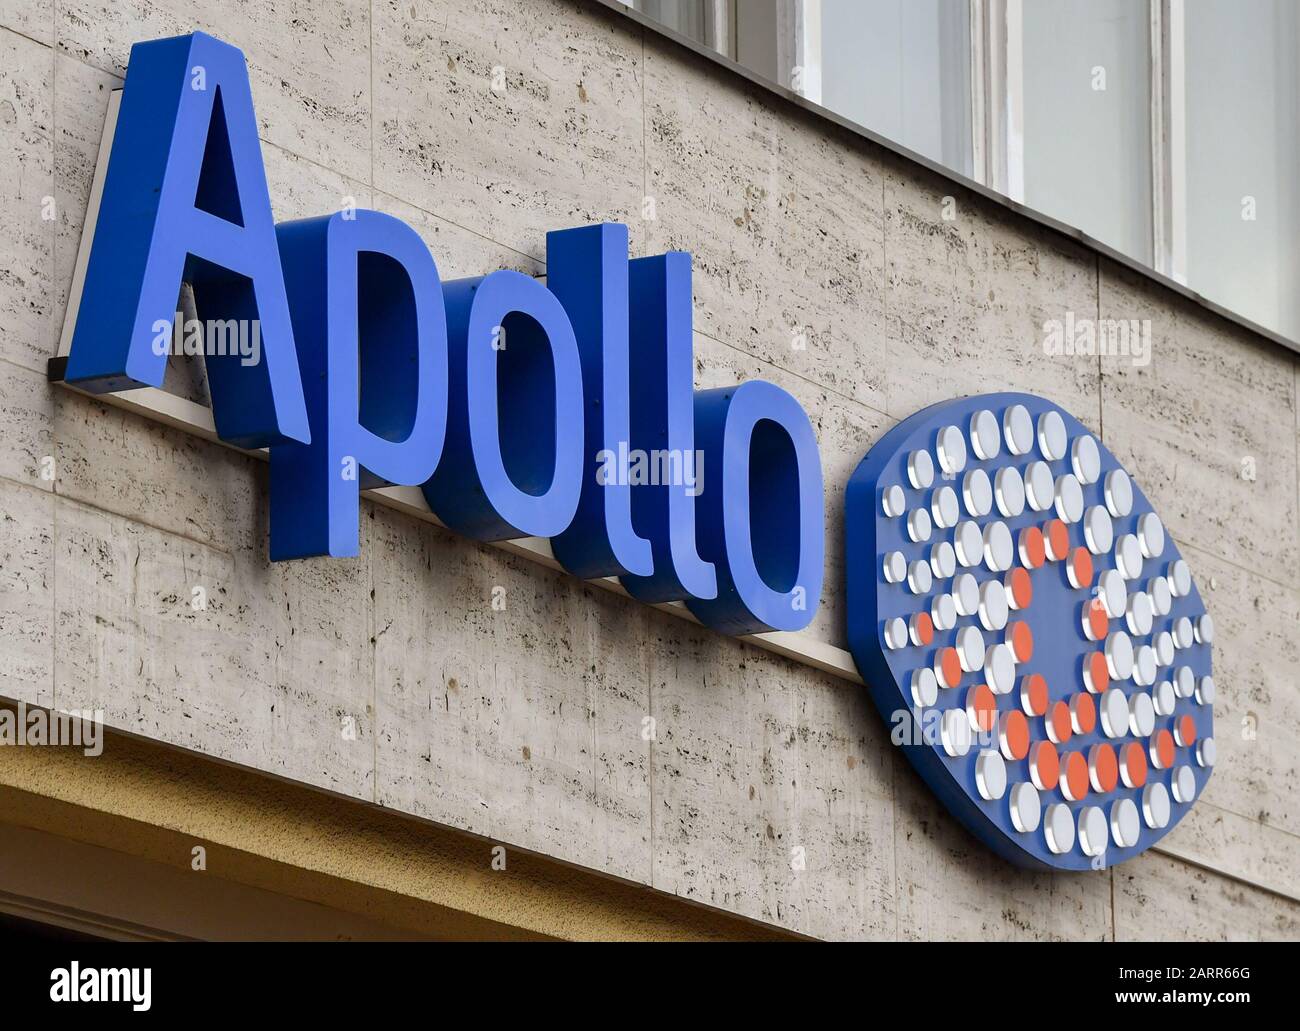 Apollo Optics High Resolution Stock Photography and Images - Alamy